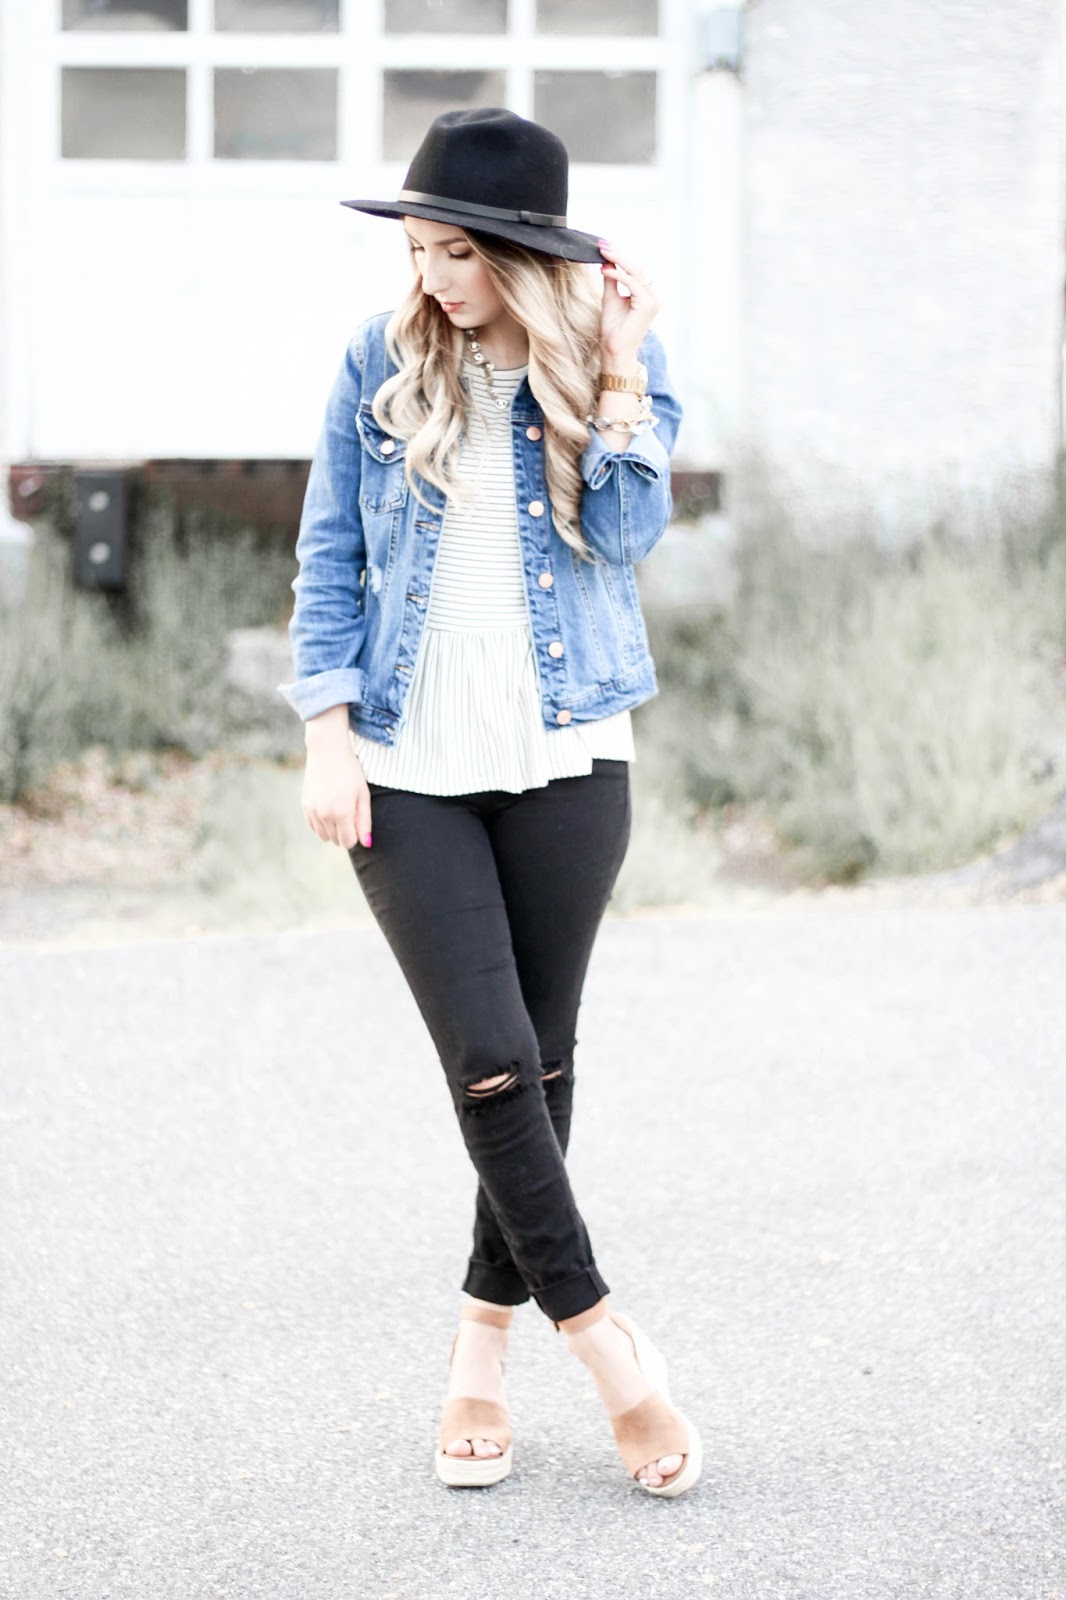 HIPSTER GLAM OUTFIT || DENIM & STRIPES | A Classy Fashionista